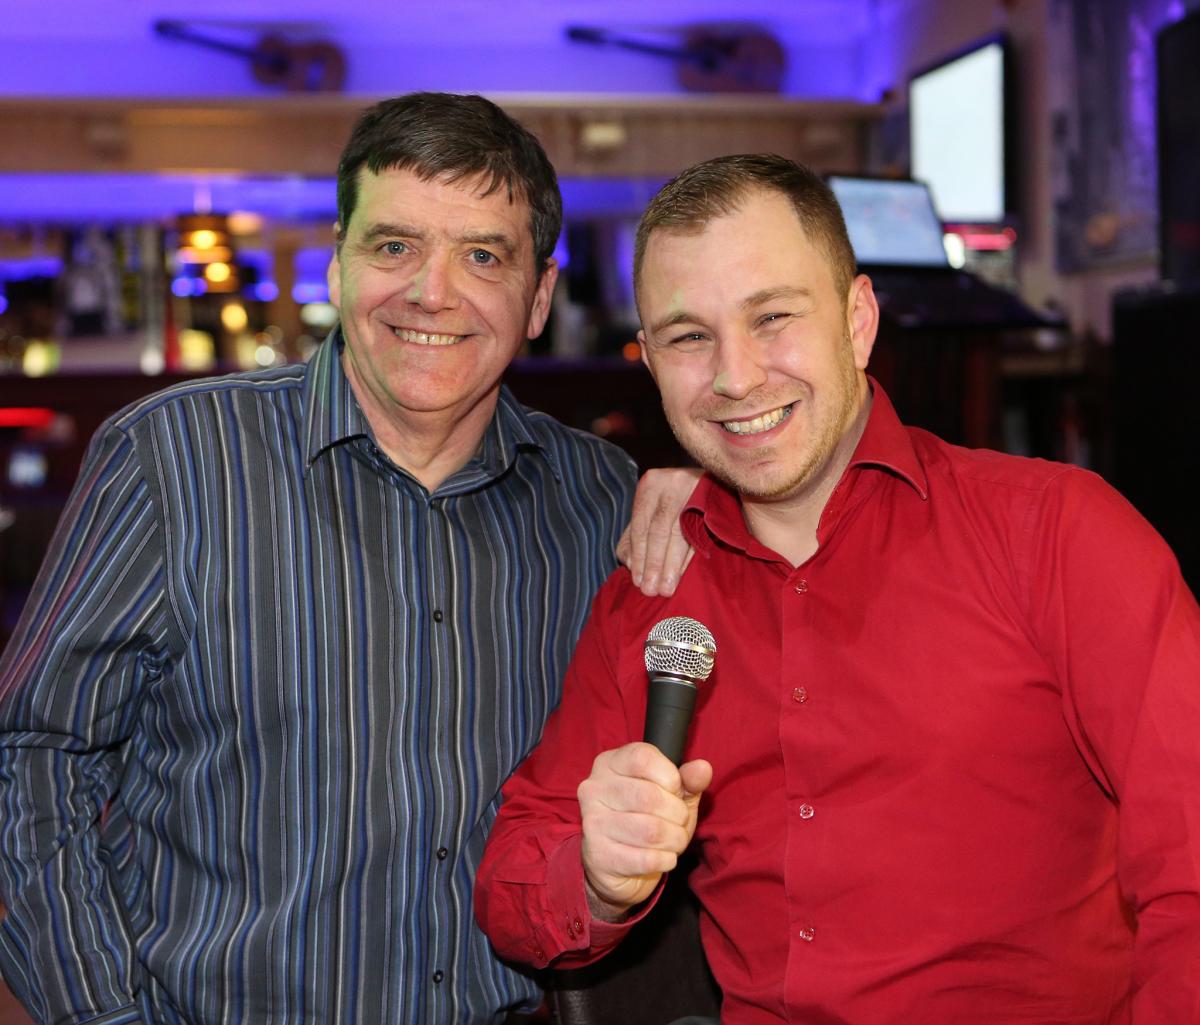 Dance tutor Philip Hurst (right) with owner of The Venue John Wray